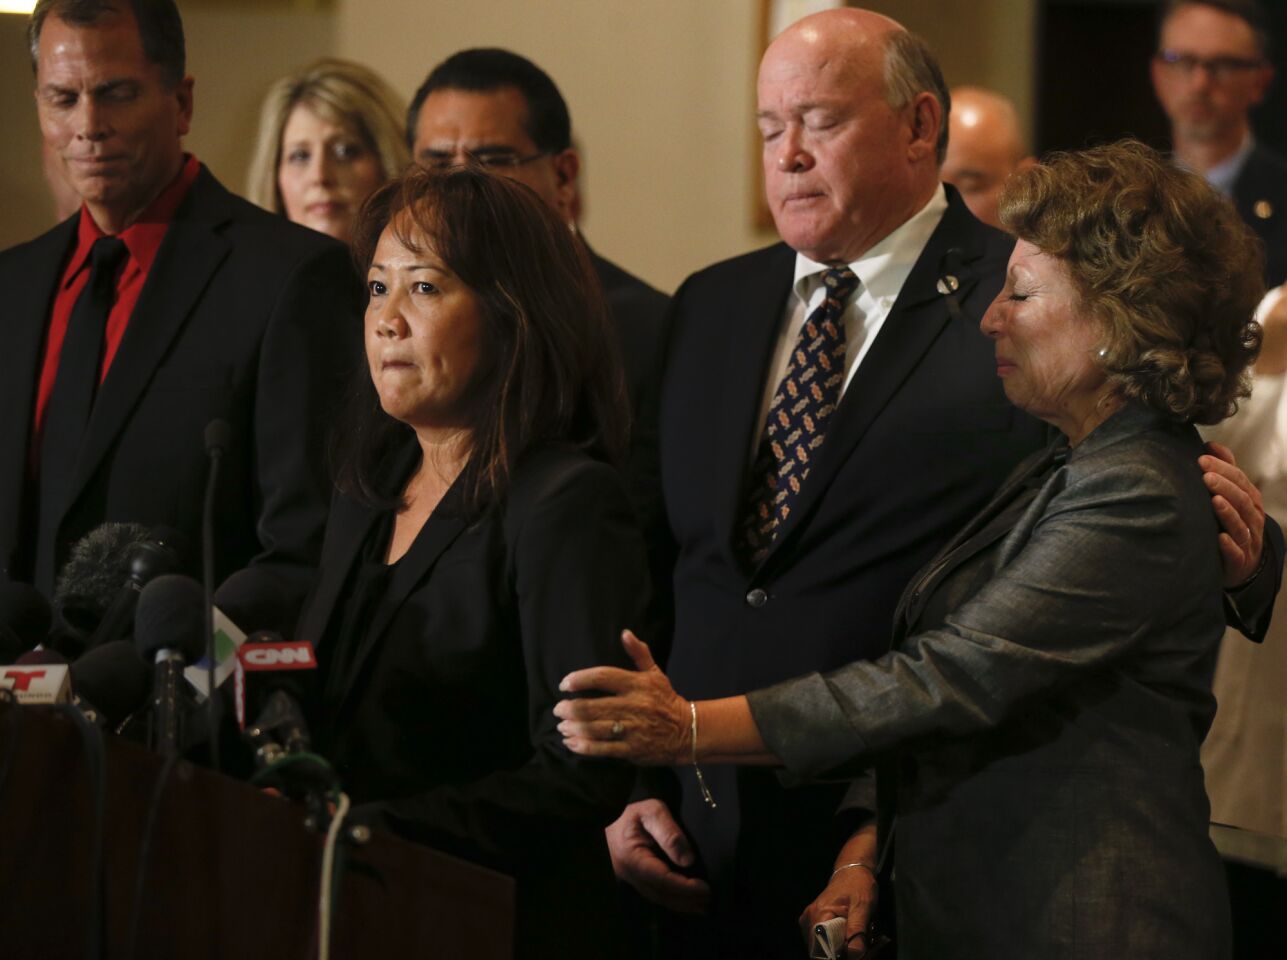 Trudy Raymundo, director the the San Bernardino County Department of Public Health, is surrounded by San Bernardino County supervisors as she addresses the media during a press conference Monday.